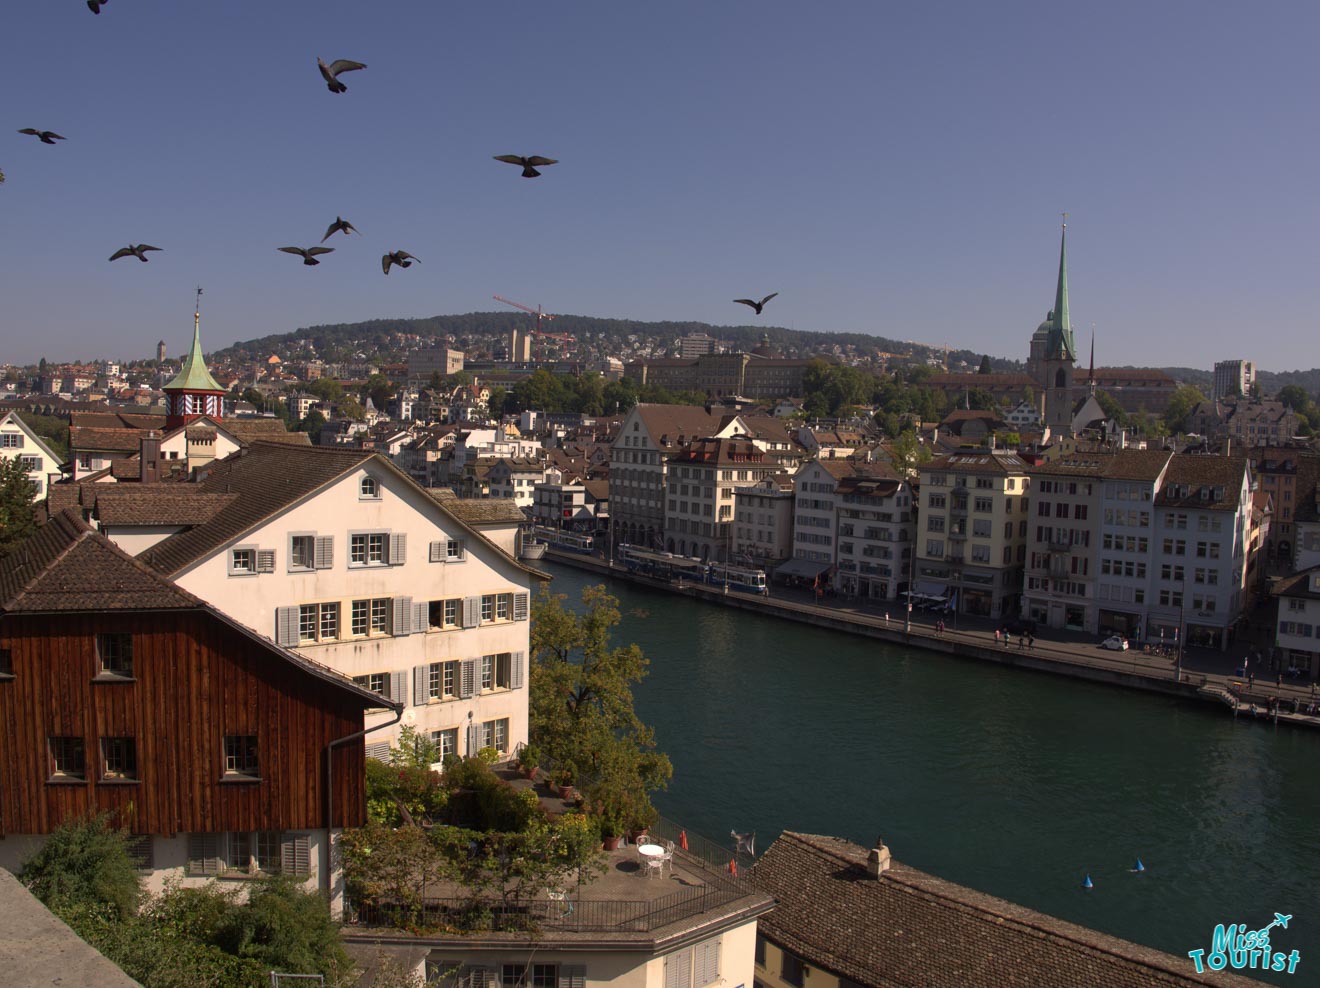 A view over the rooftops of Zurich, with the Limmat river flowing through the city, and birds in flight above the historical architecture under a clear blue sky.